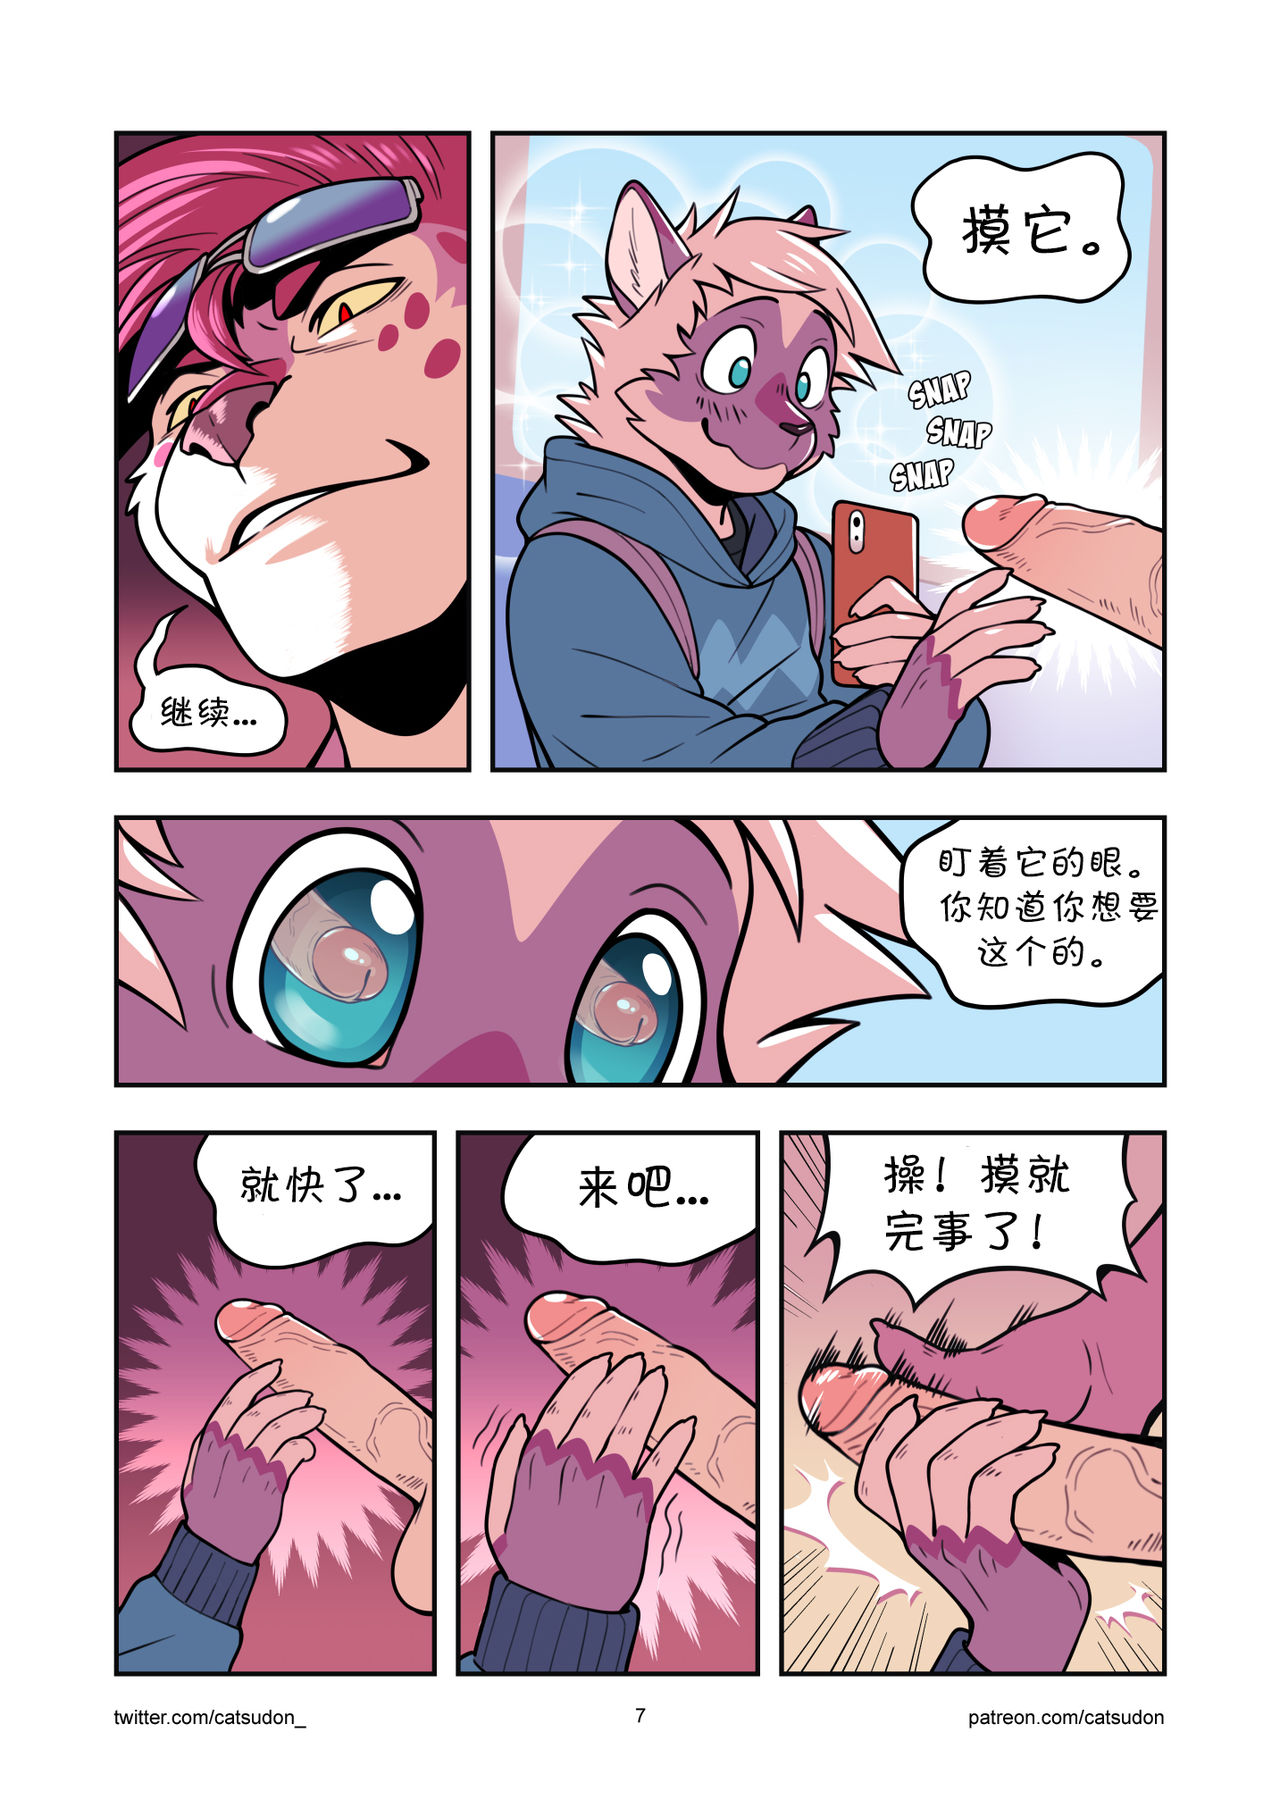 [Catsudon] It's a Good Day to Go to the Nude Beach (Ongoing) [Chinese] 